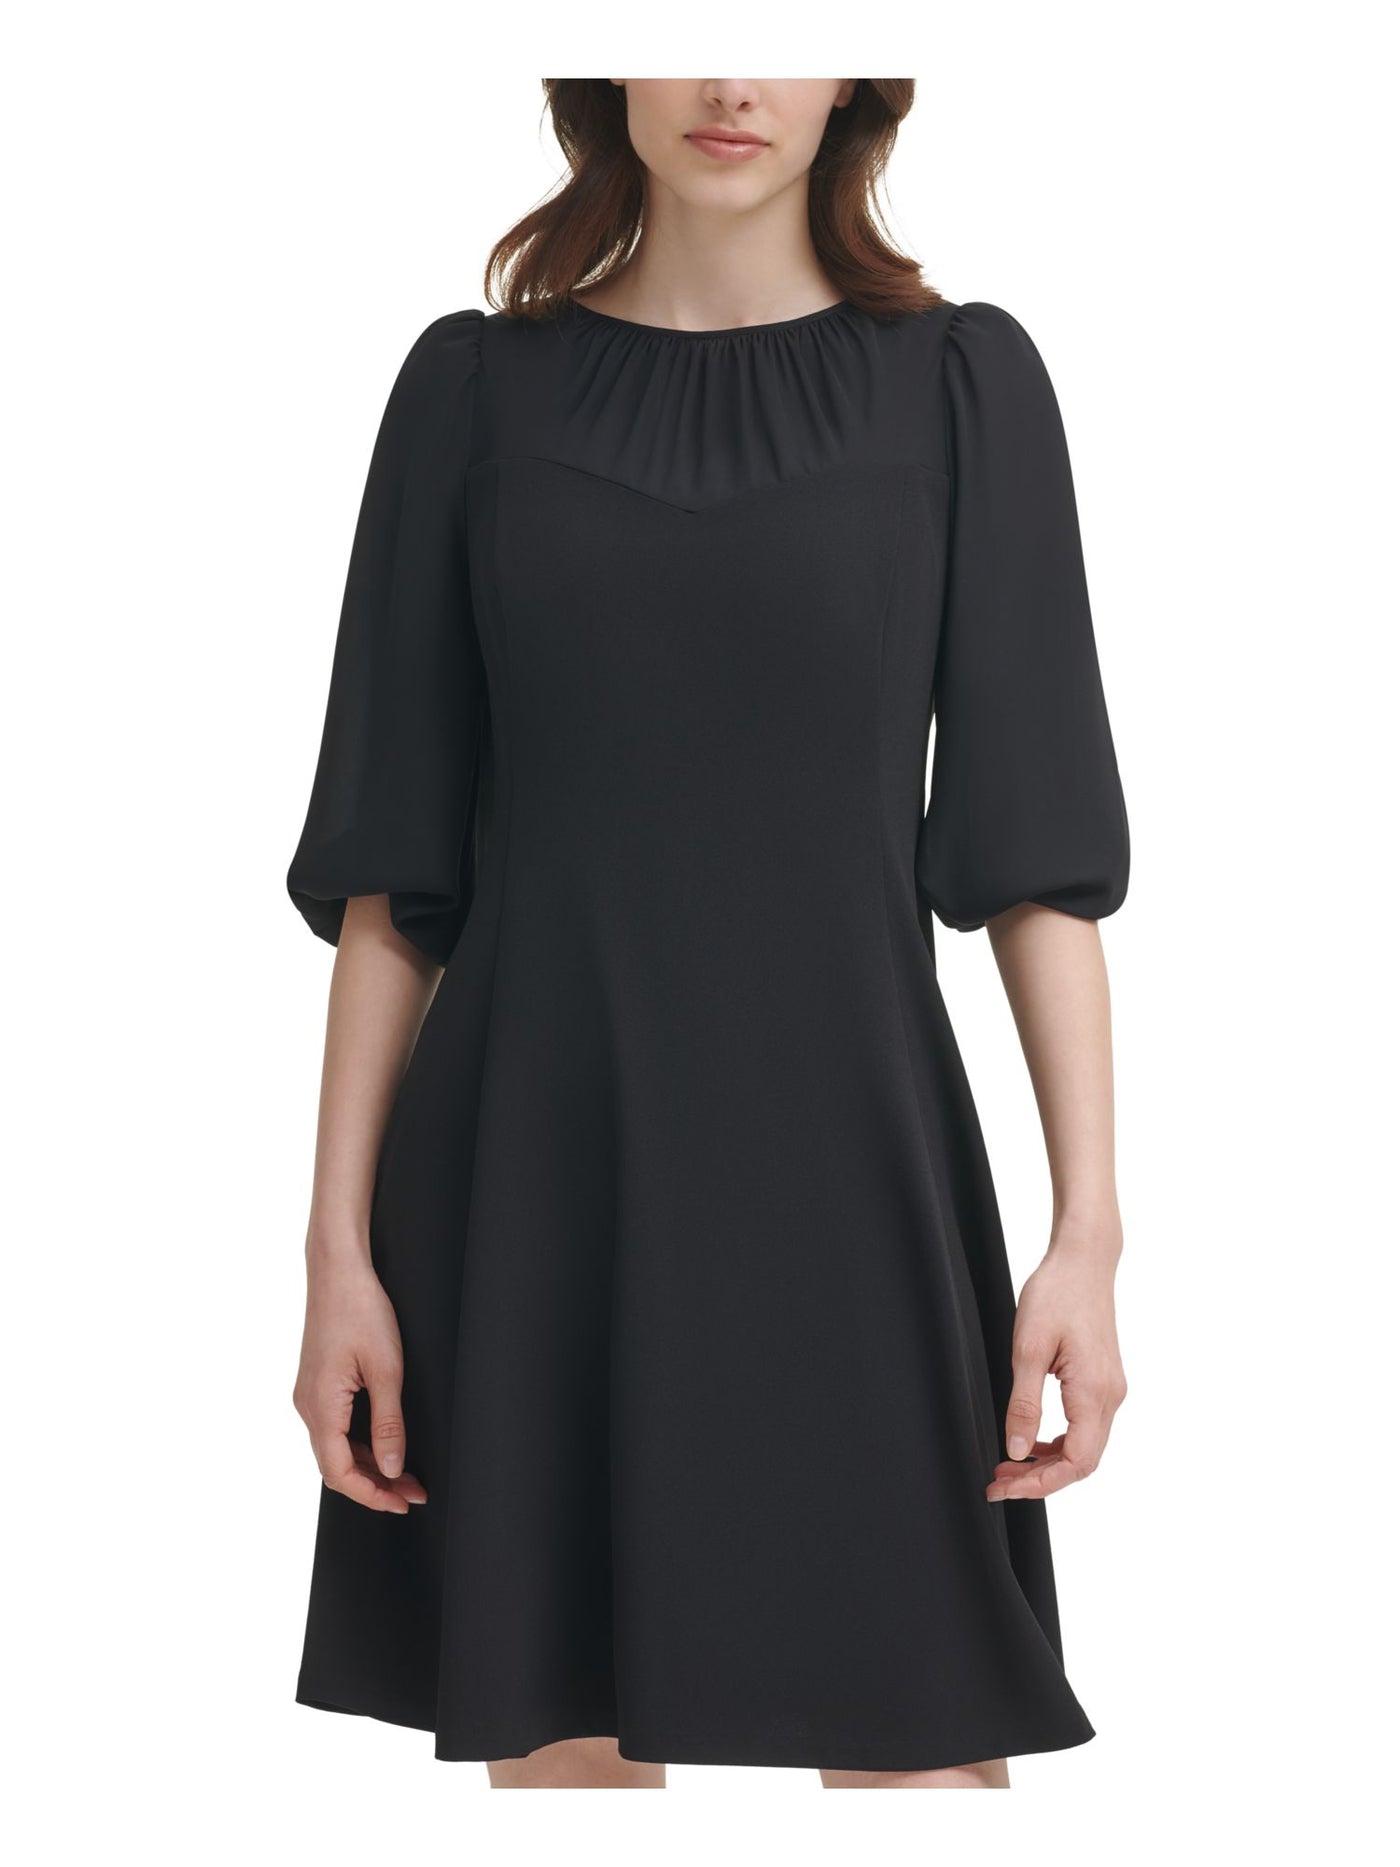 DKNY Womens Black Zippered Sheer Keyhole Back Unlined Pouf Sleeve Round Neck Above The Knee Cocktail Fit + Flare Dress 10